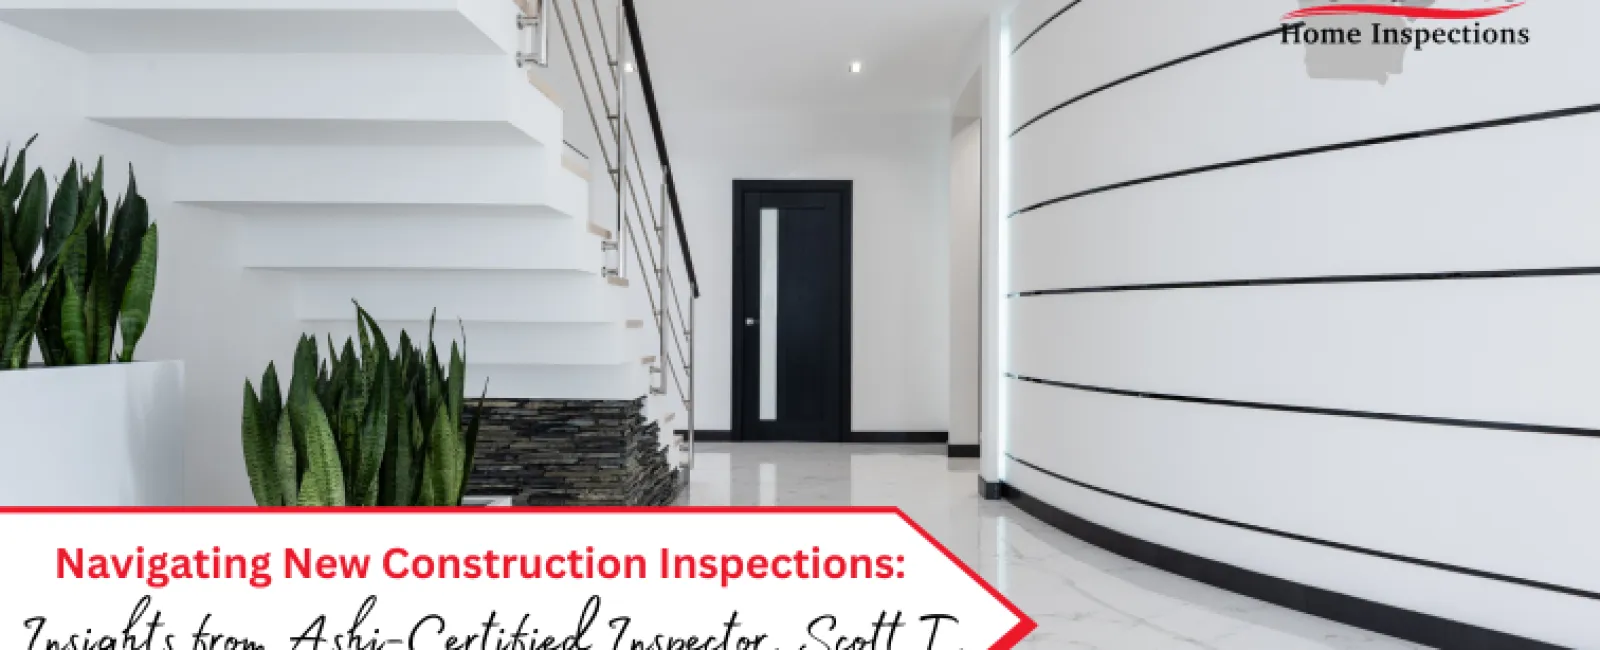 Navigating New Construction Inspections